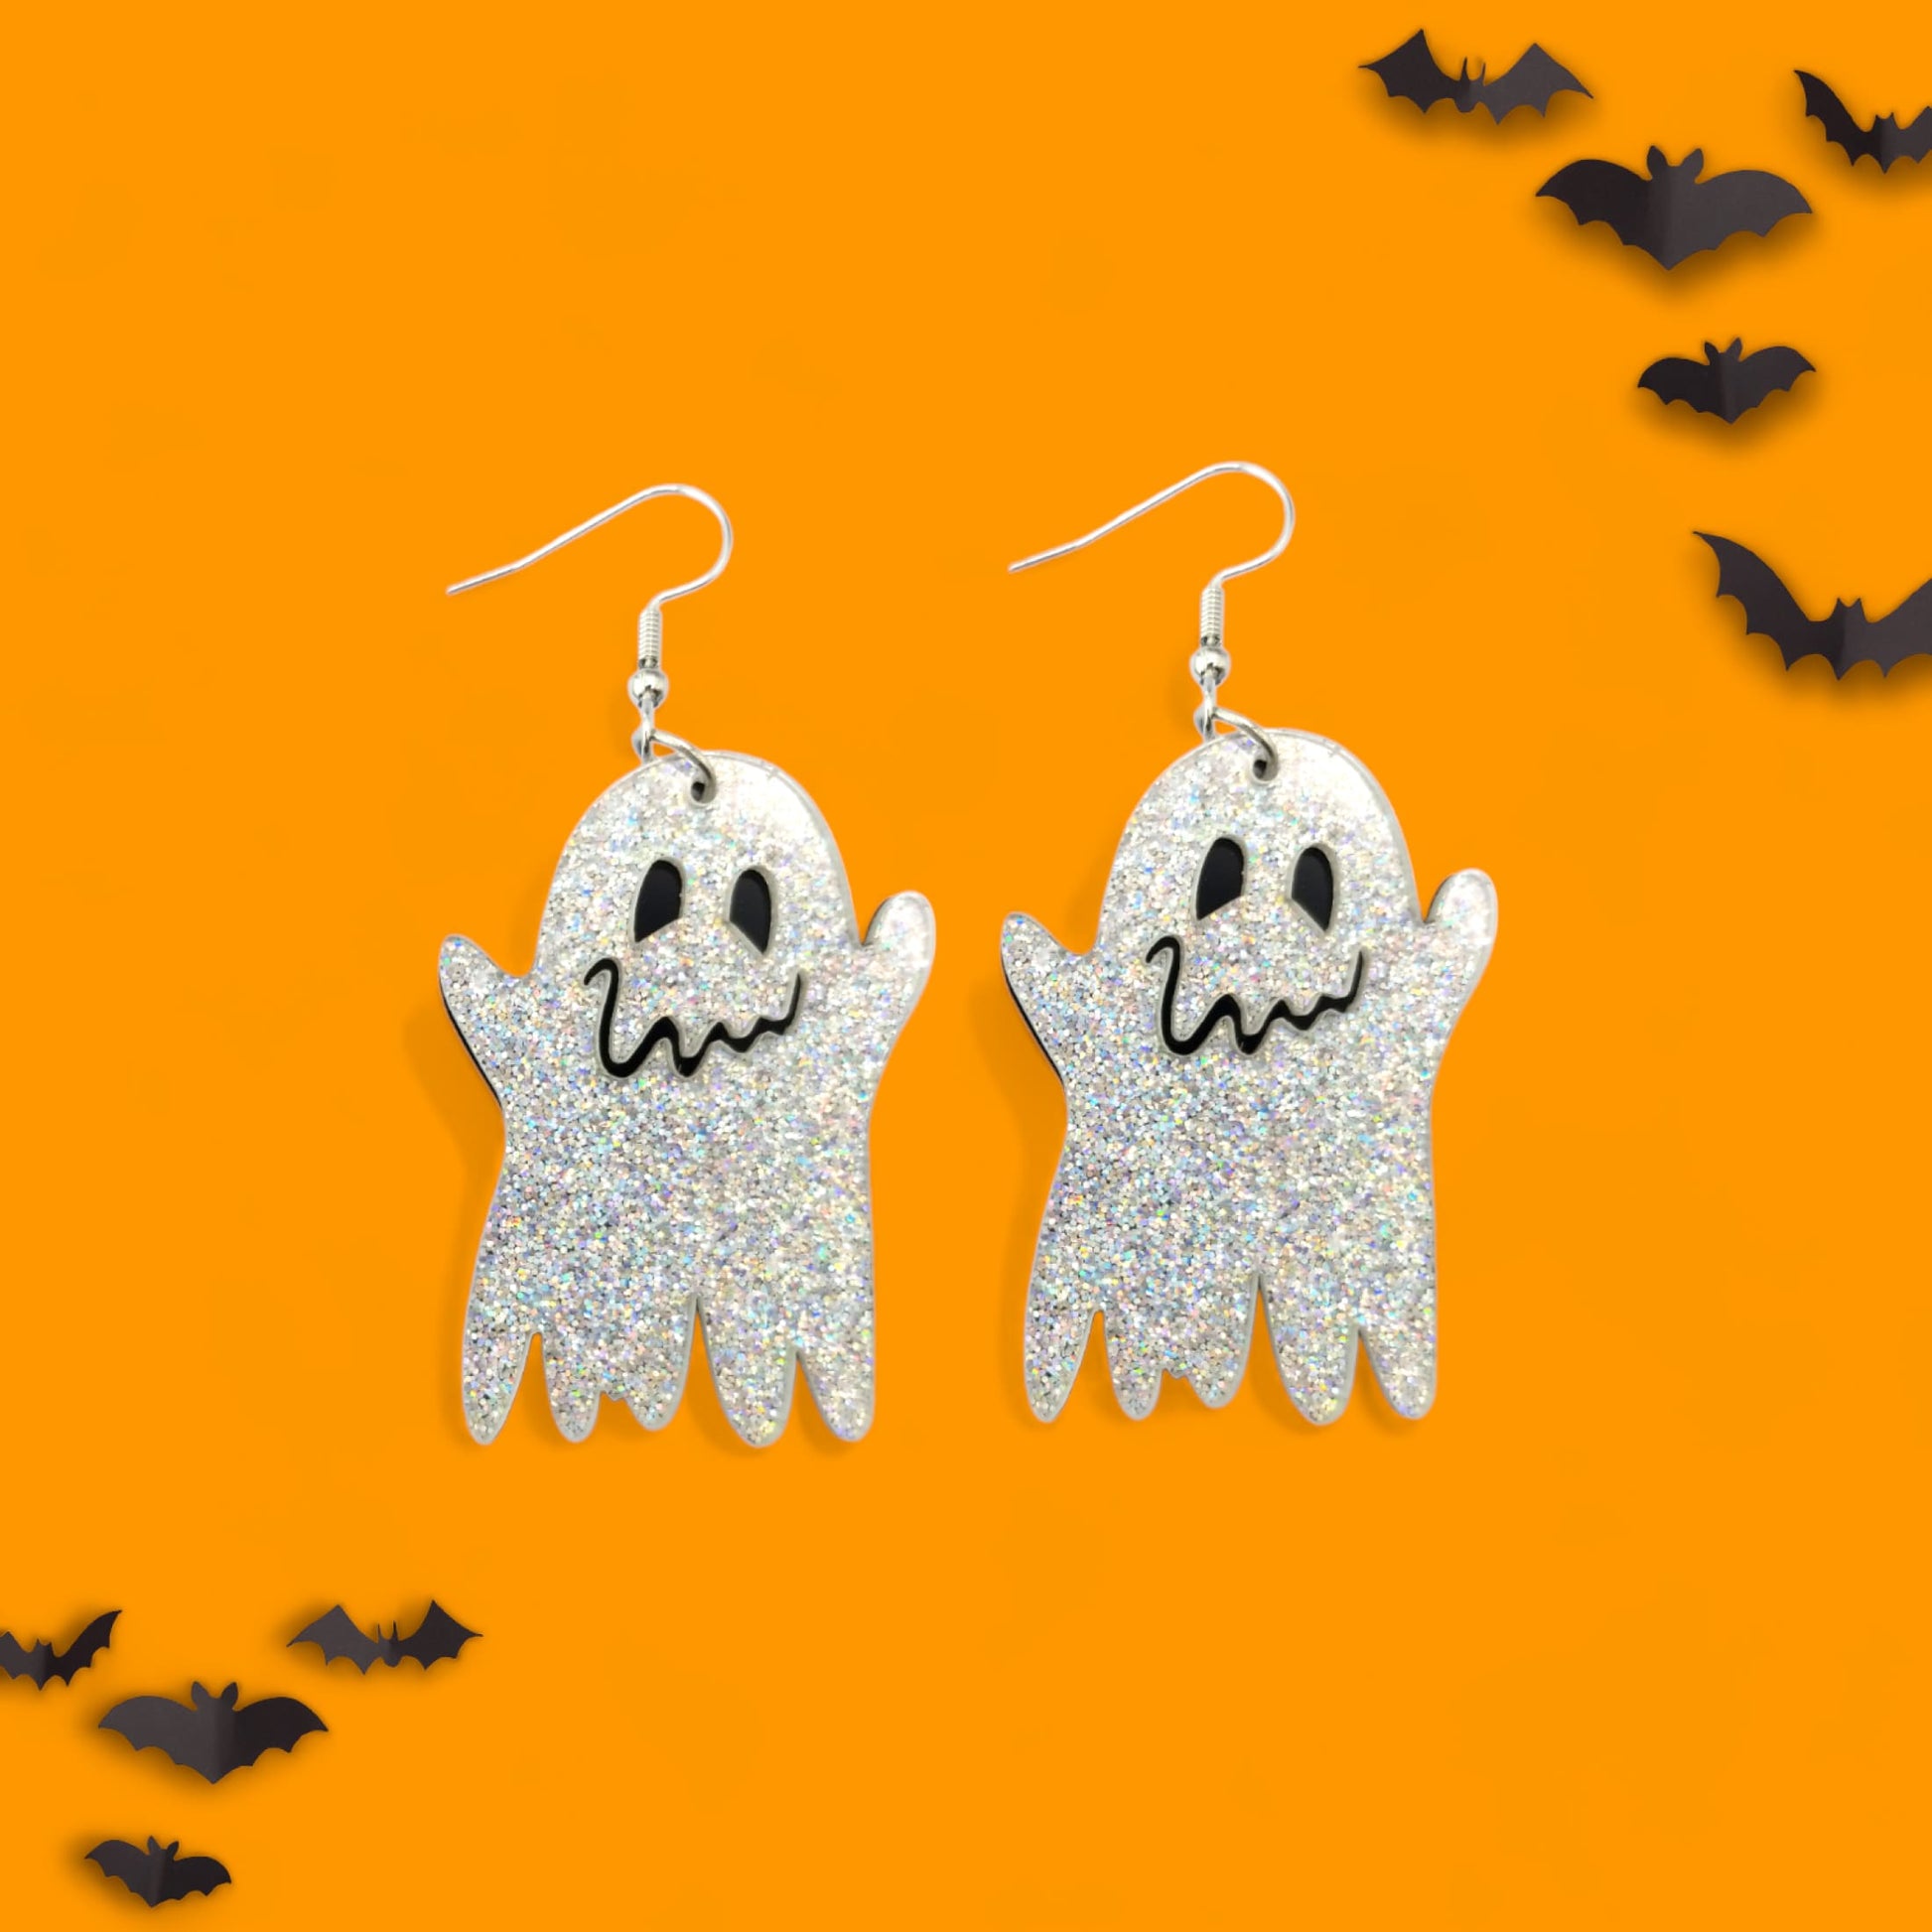 Spooky Sparkly Ghost Earrings from Confetti Kitty, Only 7.99